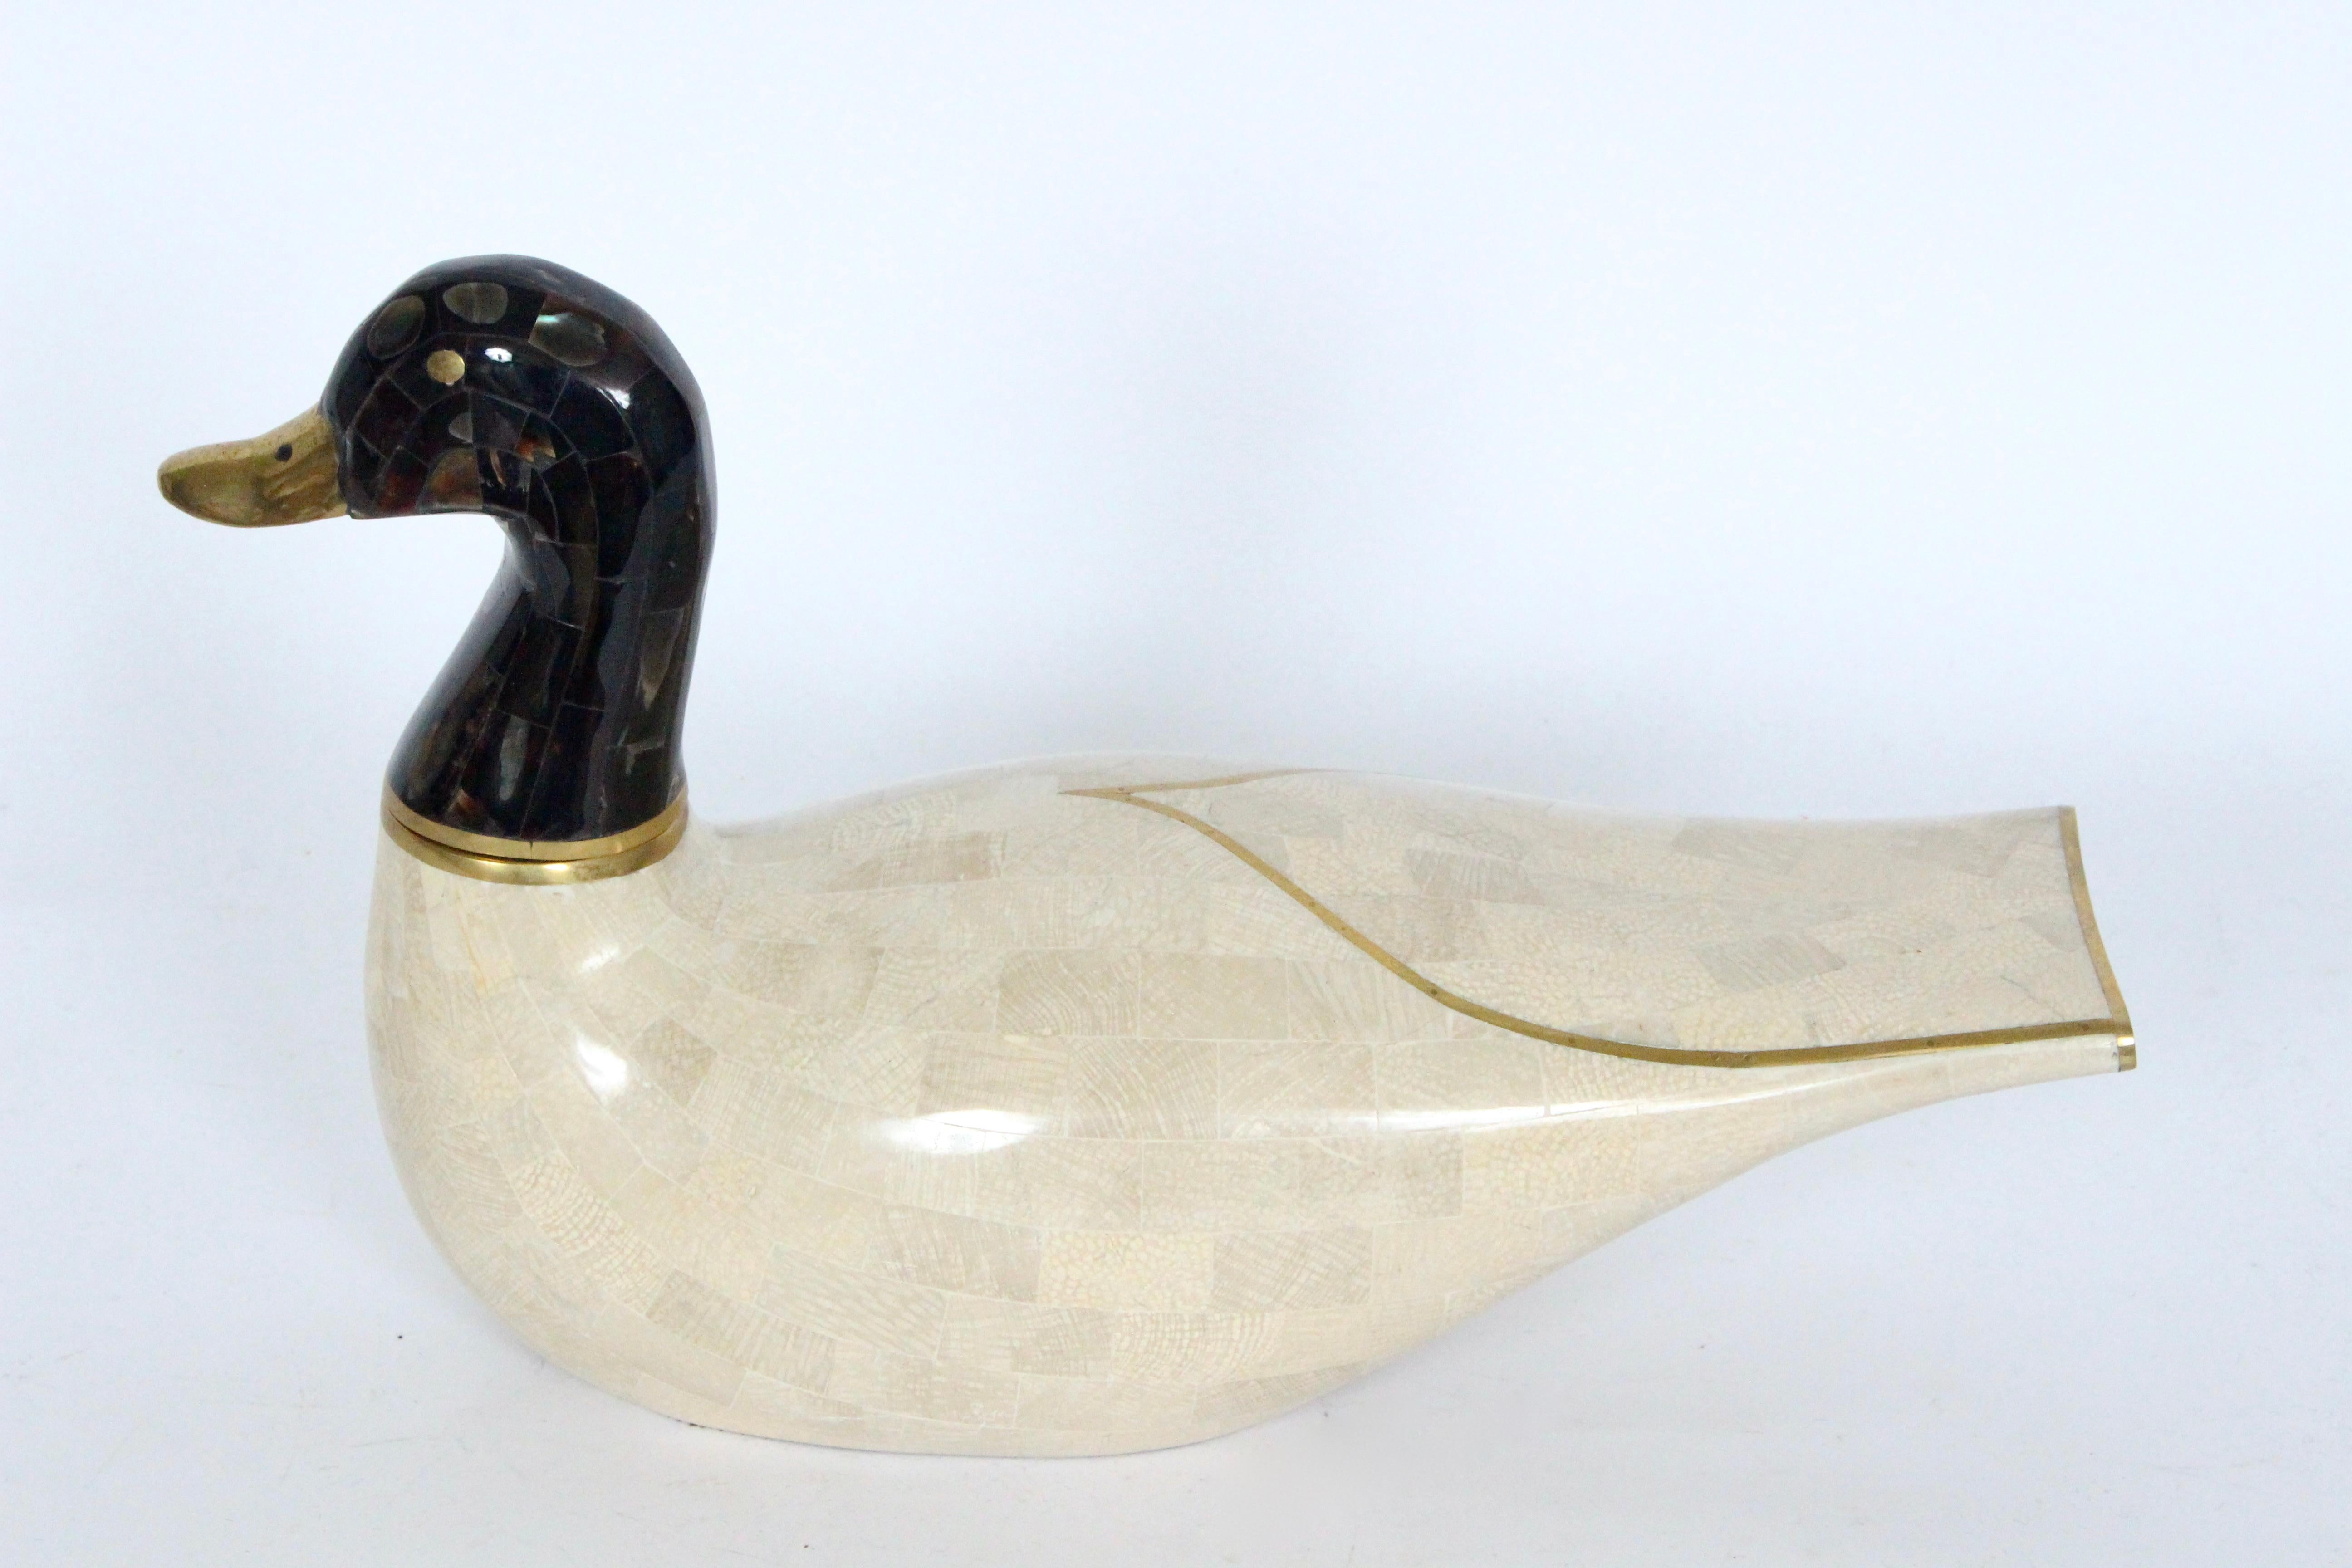 1988 Maitland Smith handcrafted tessellated Marble decorative Water Bird. Featuring a rounded oval, floating waterfowl, shore bird form accented with ivory cream tessellated marble, inset Brass body accents, reflective Black Marble head that swivels